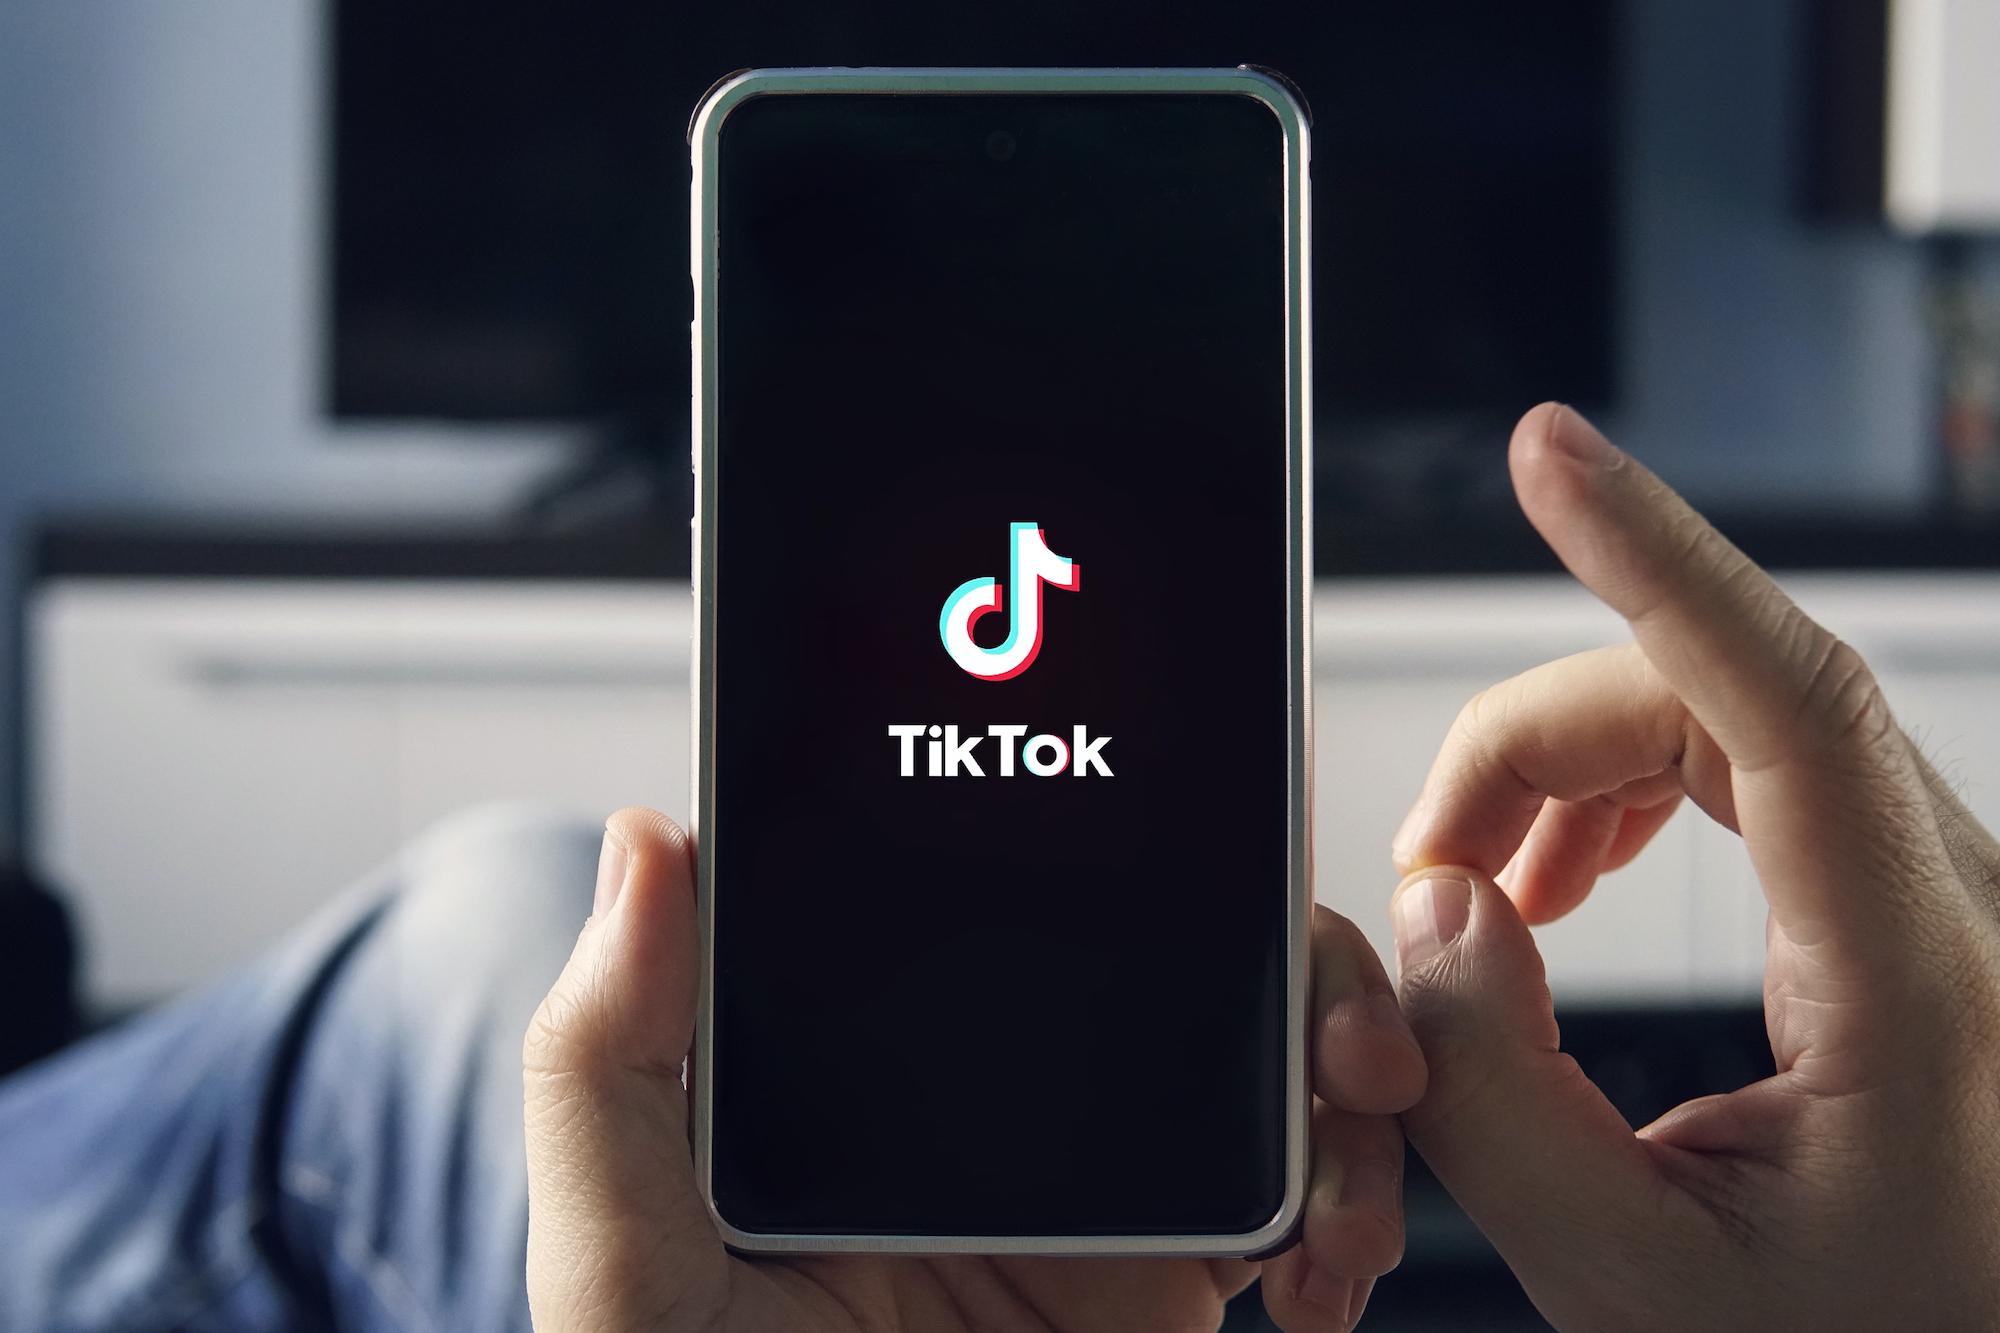 Should We Worry About the TikTok App on Work Devices?